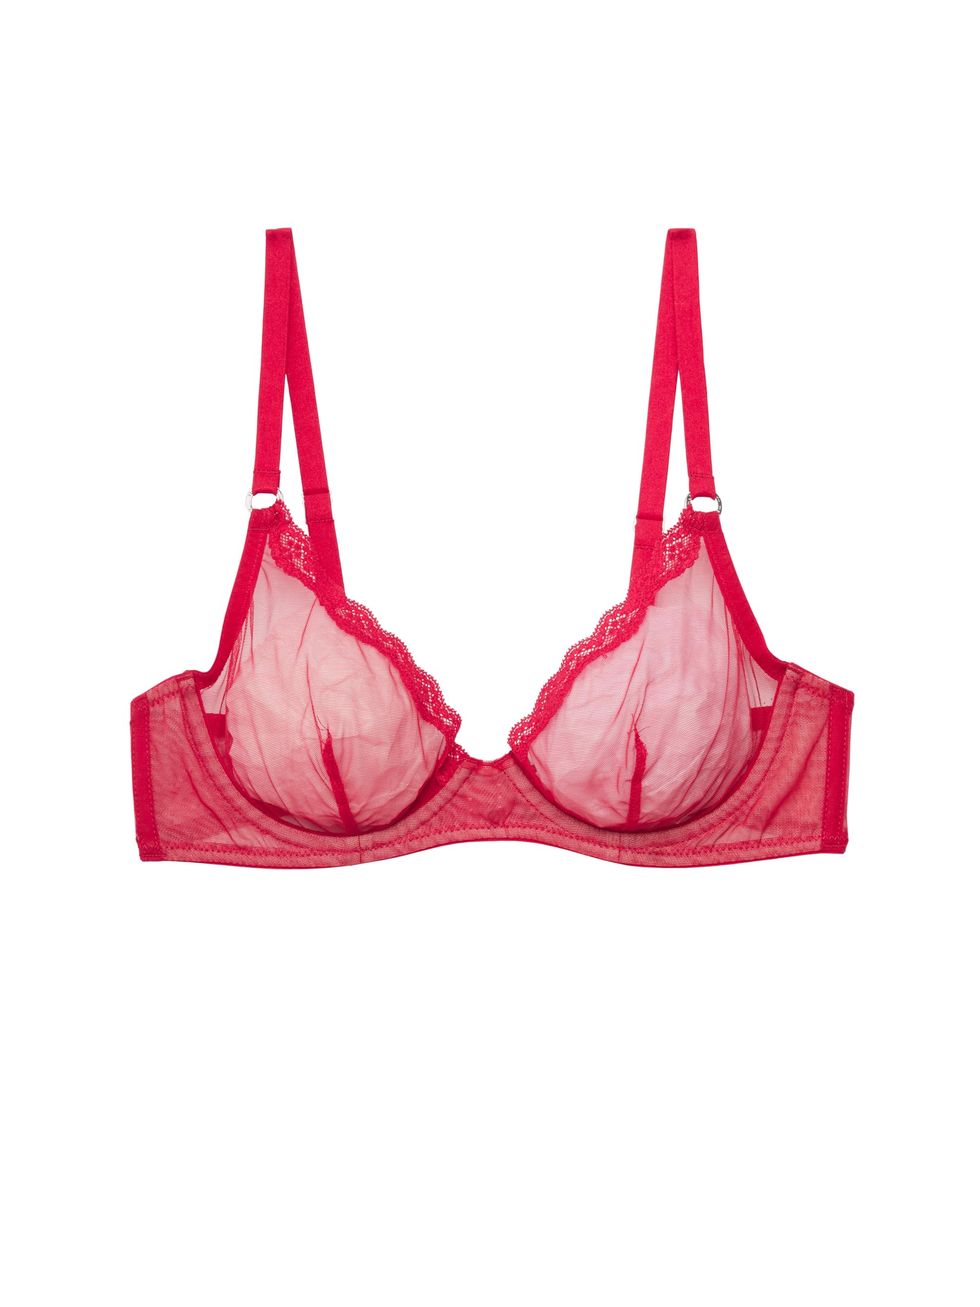 10 Pieces of Lingerie to Buy Yourself This Valentine’s Day